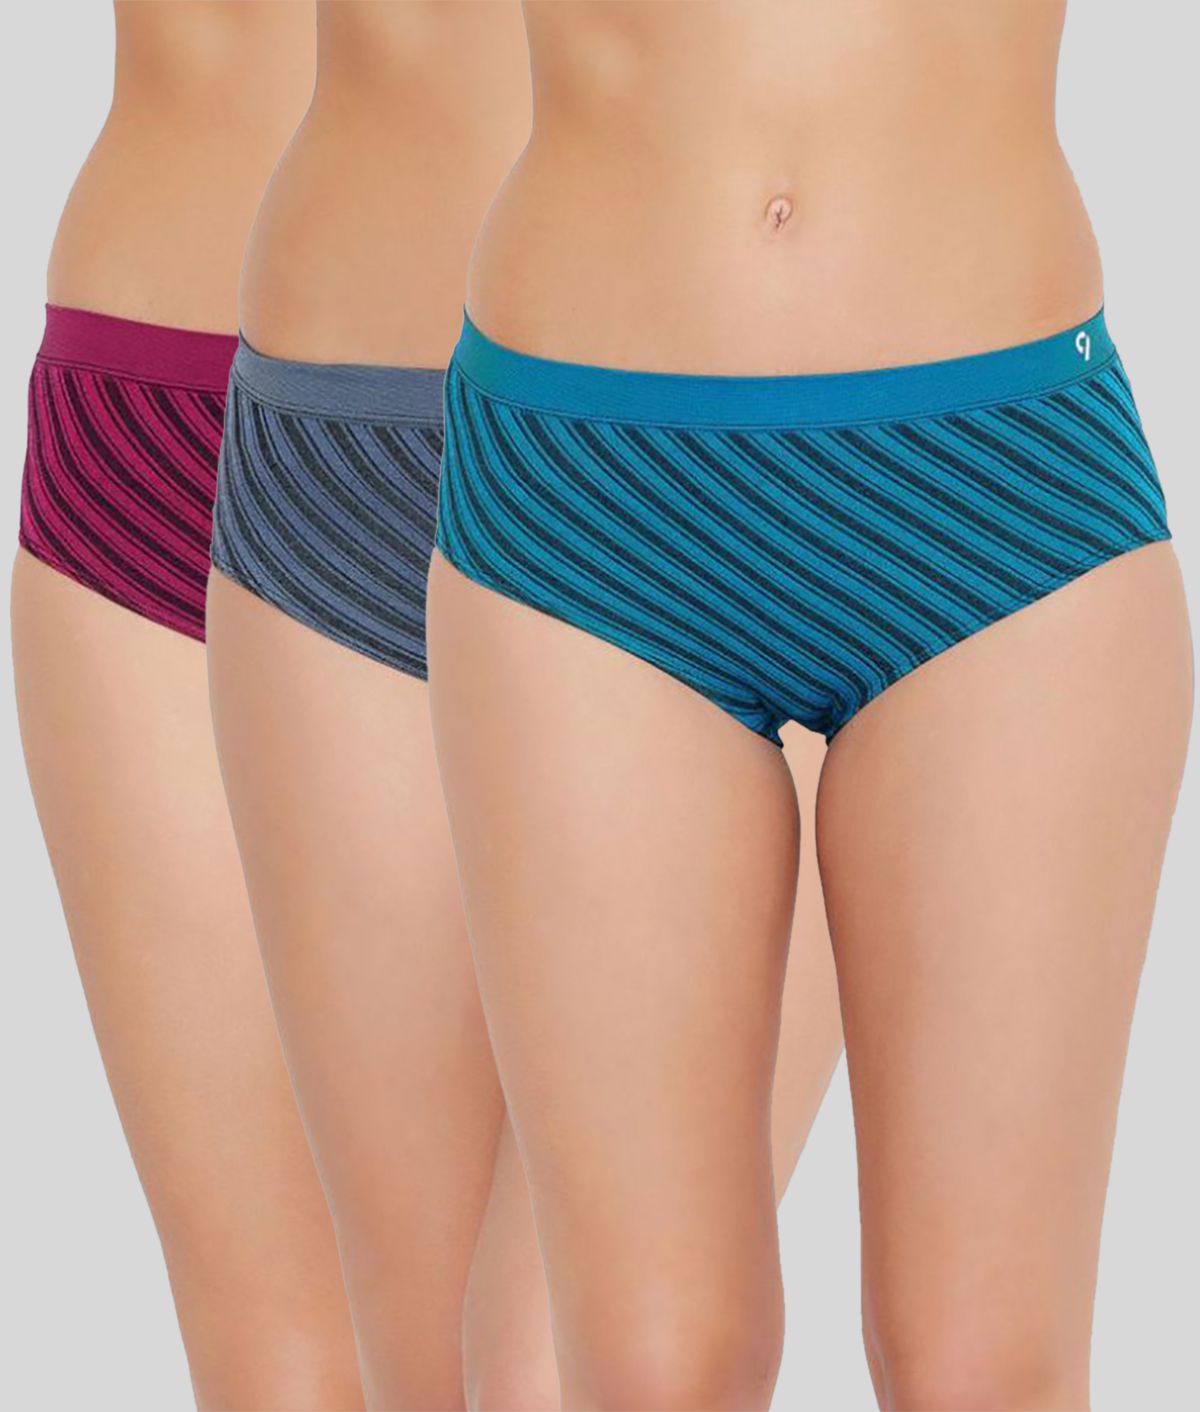 C9 Airwear - Multicolor Polyester Striped Women's Hipster ( Pack of 3 )